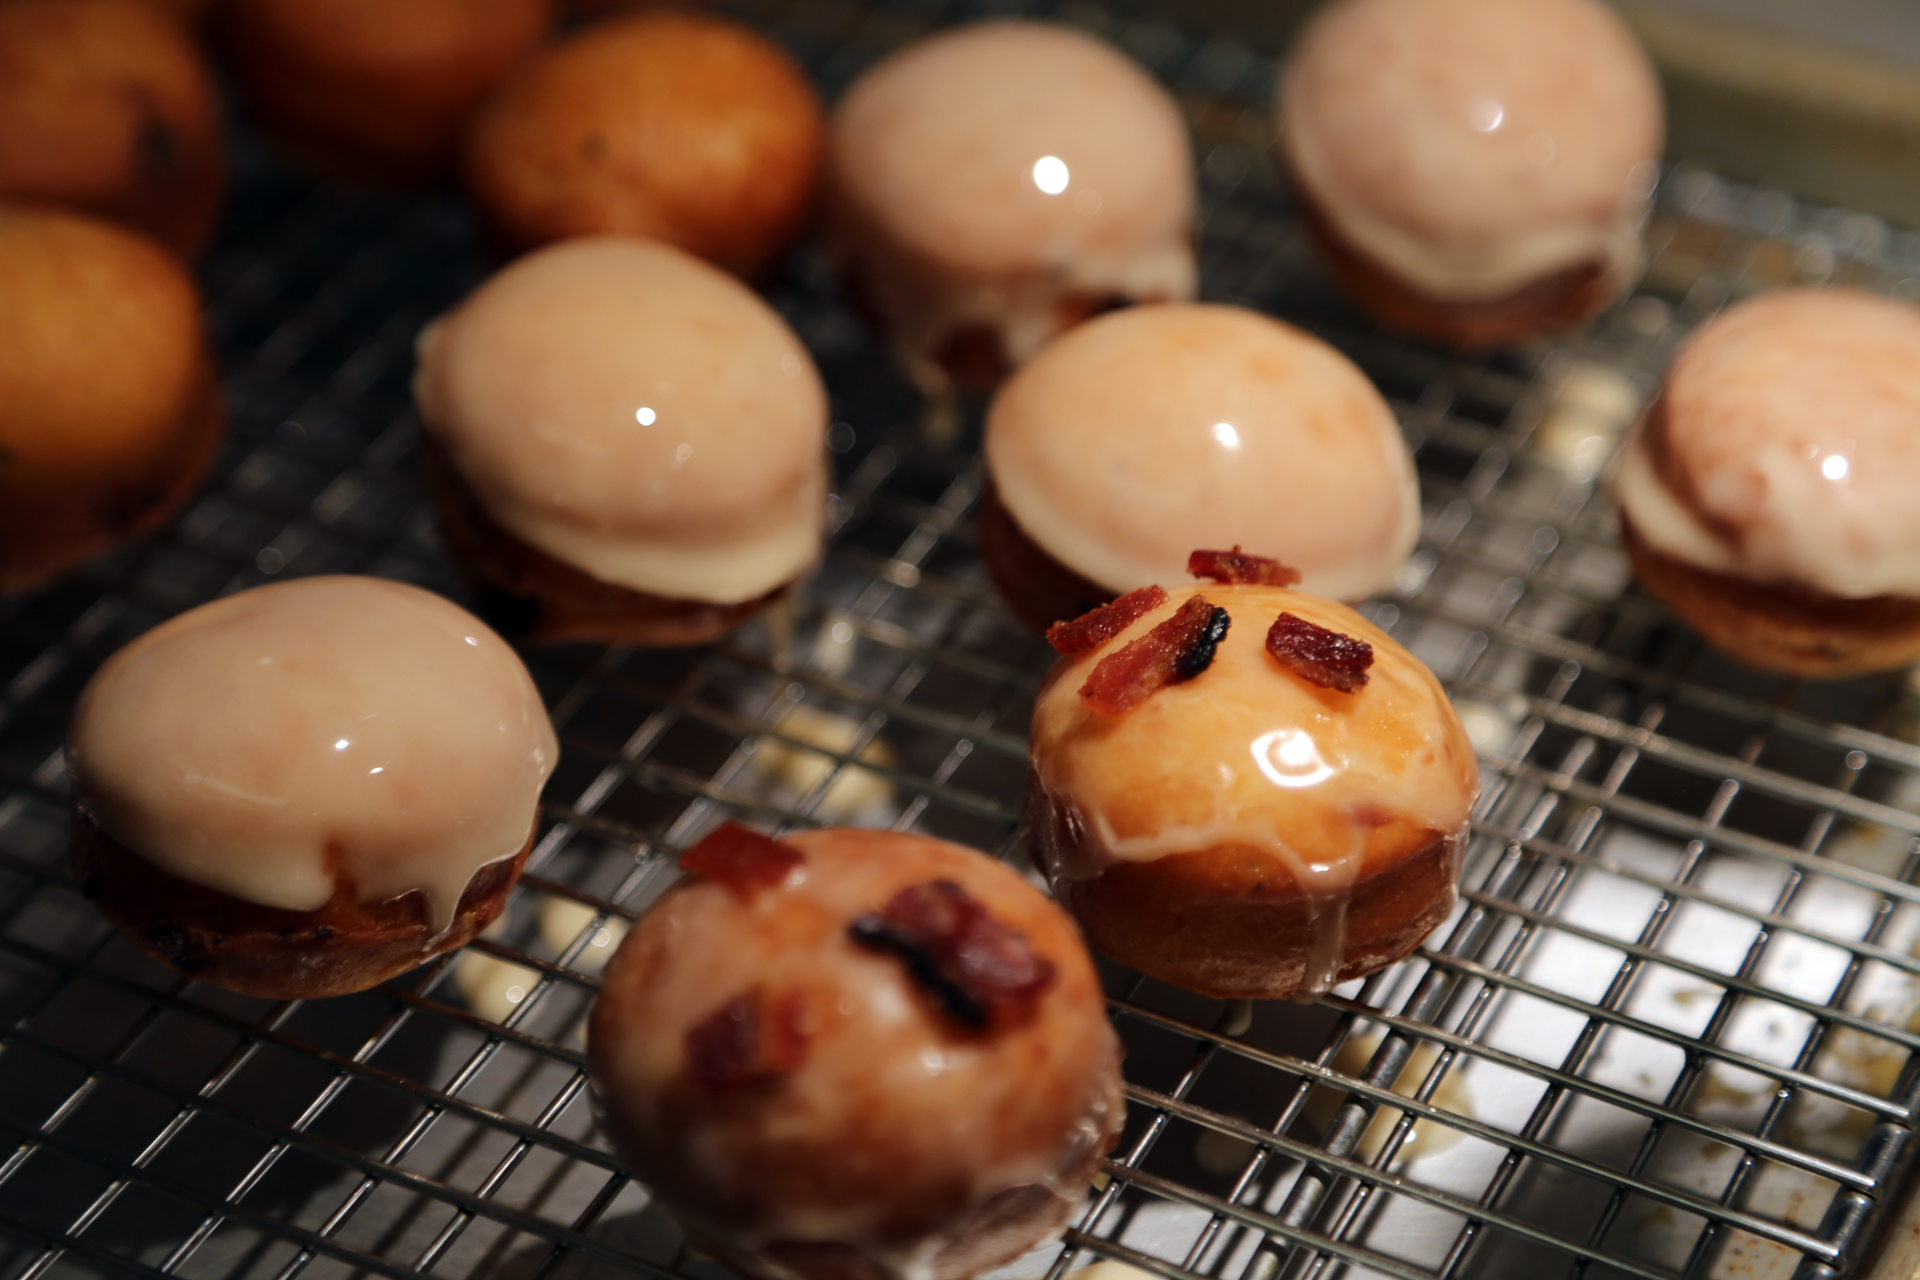 While the donuts are still warm, dip them into the glaze. Let the excess glaze drip off, and place on a wire rack set over a baking sheet. 